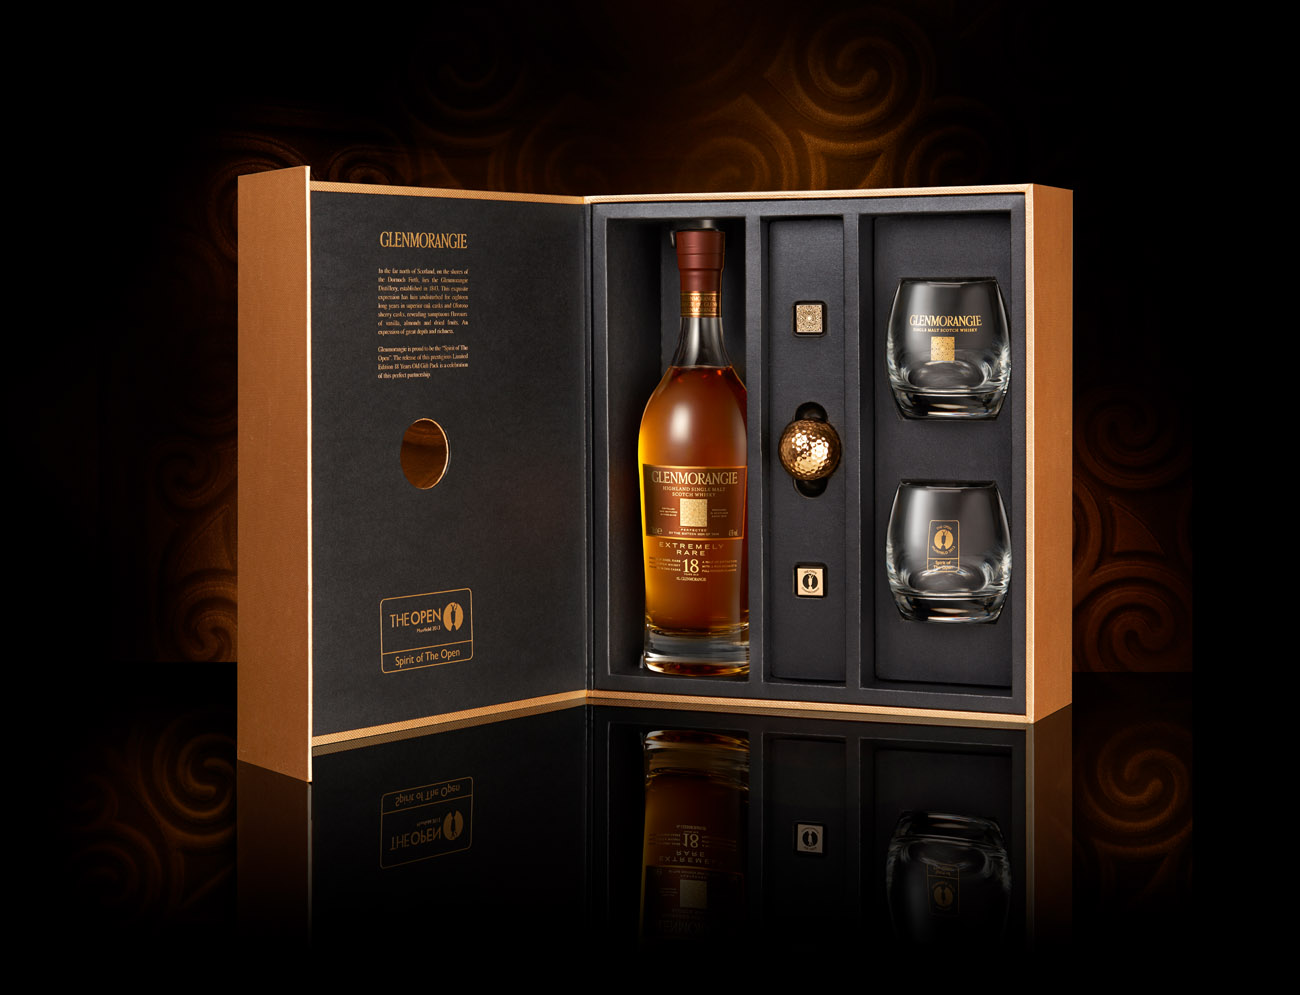 Glenmorangie 18 year old whisky with golf open gift pack